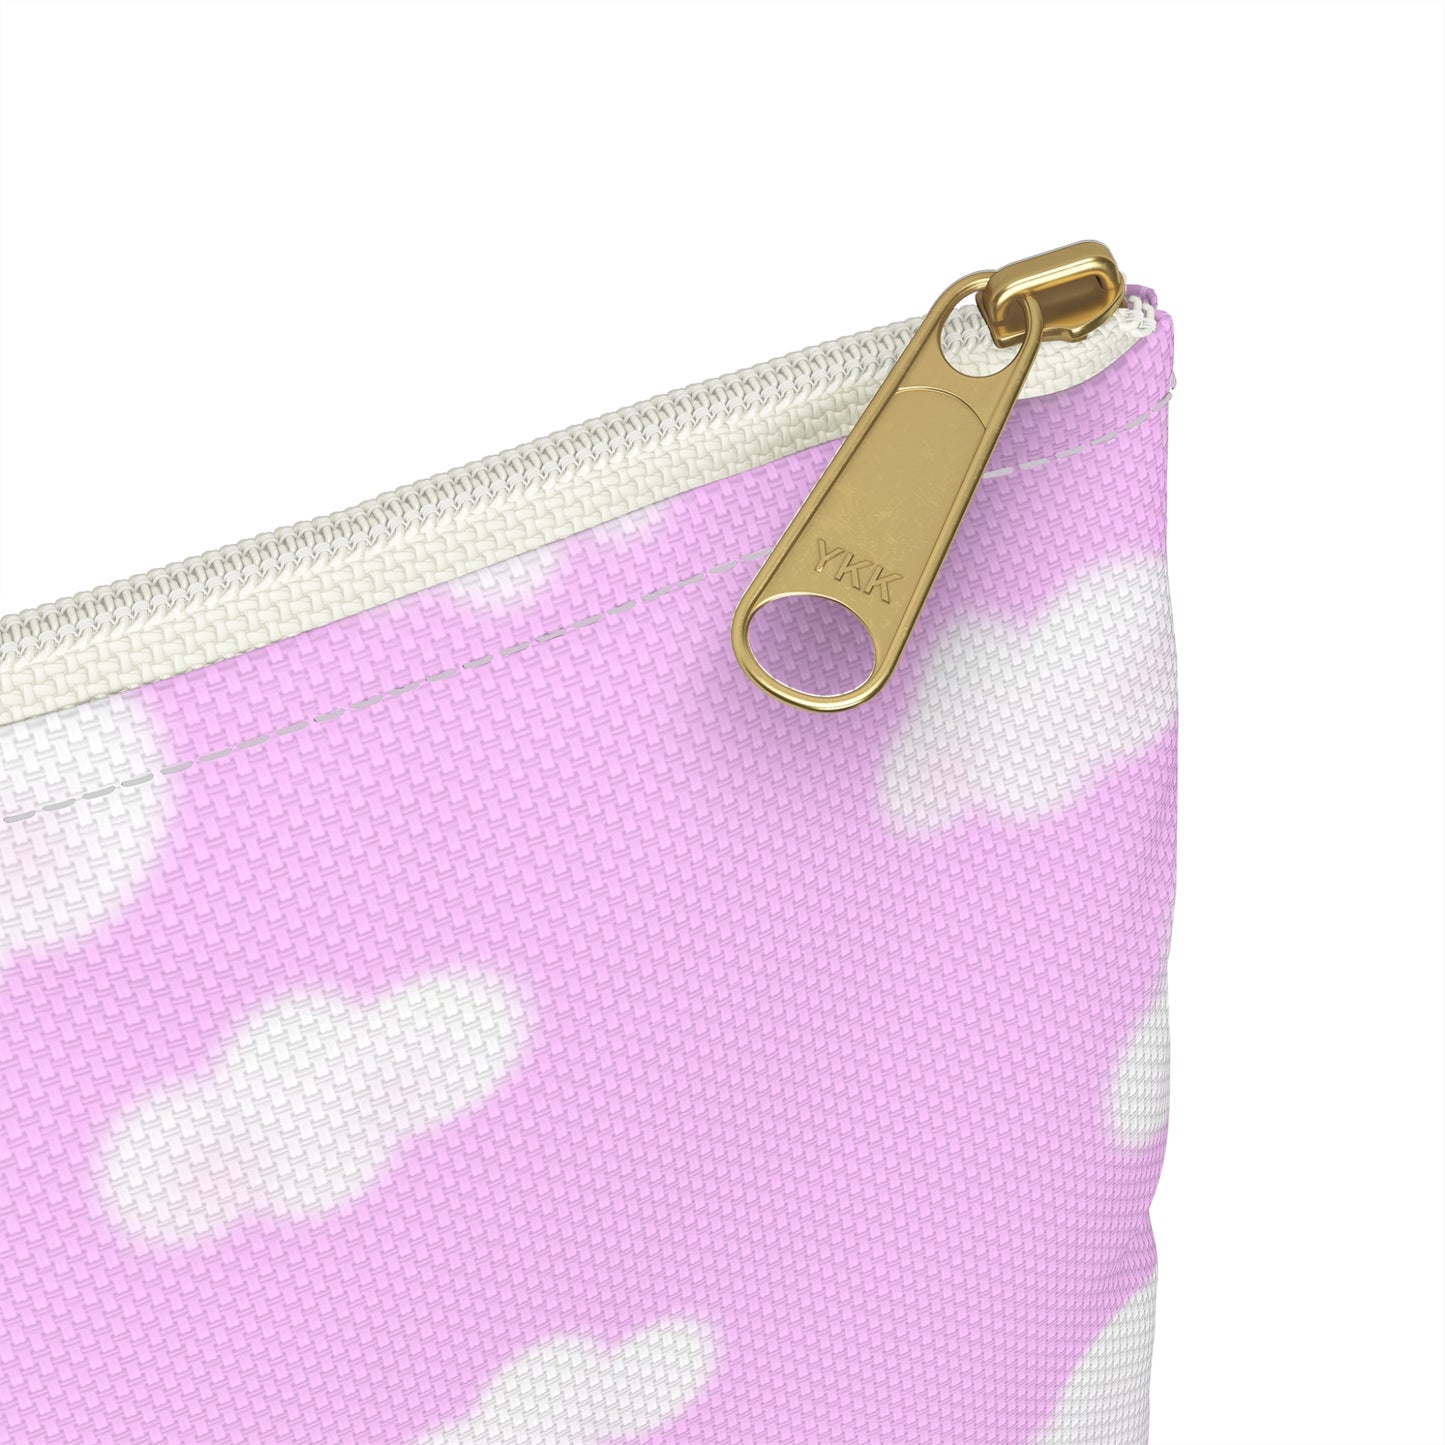 Dreamy Clouds Accessory Pouch (Taffy Pink)